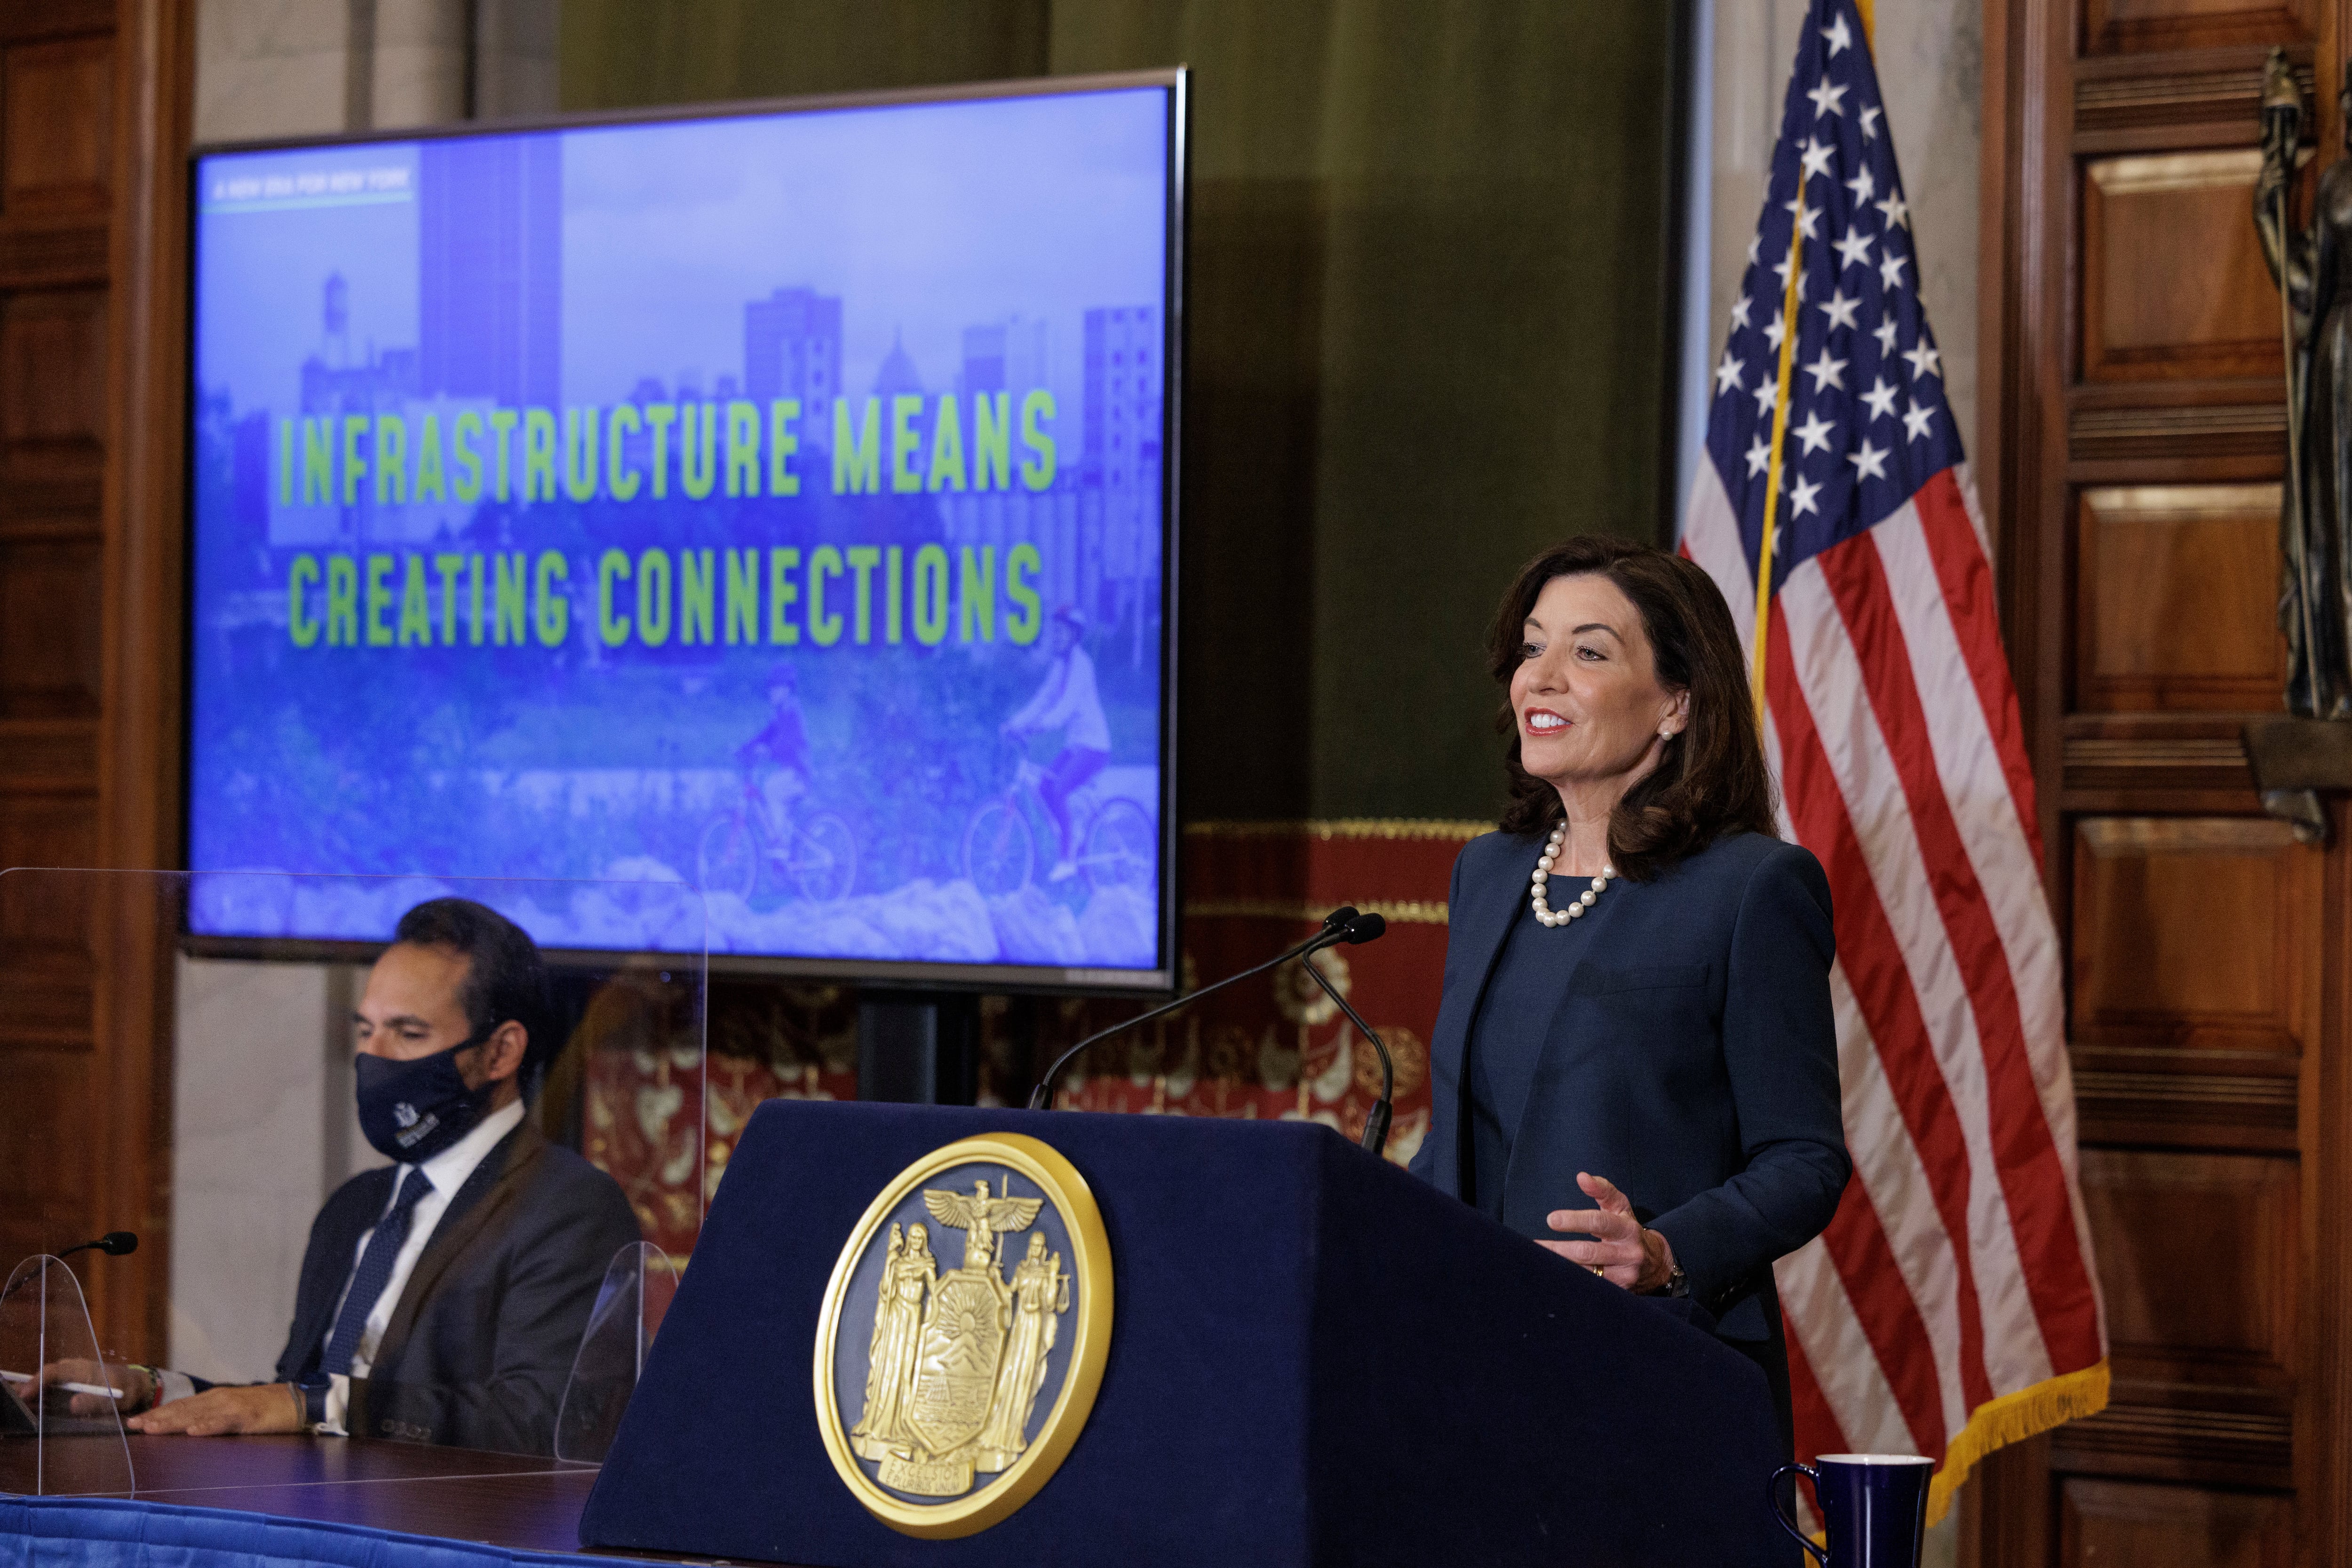 New York State Governor Kathy Hochul speaks at a podium in the State Capitol. There is a large TV playing a slideshow for the state’s yearly budget presentation in the background.